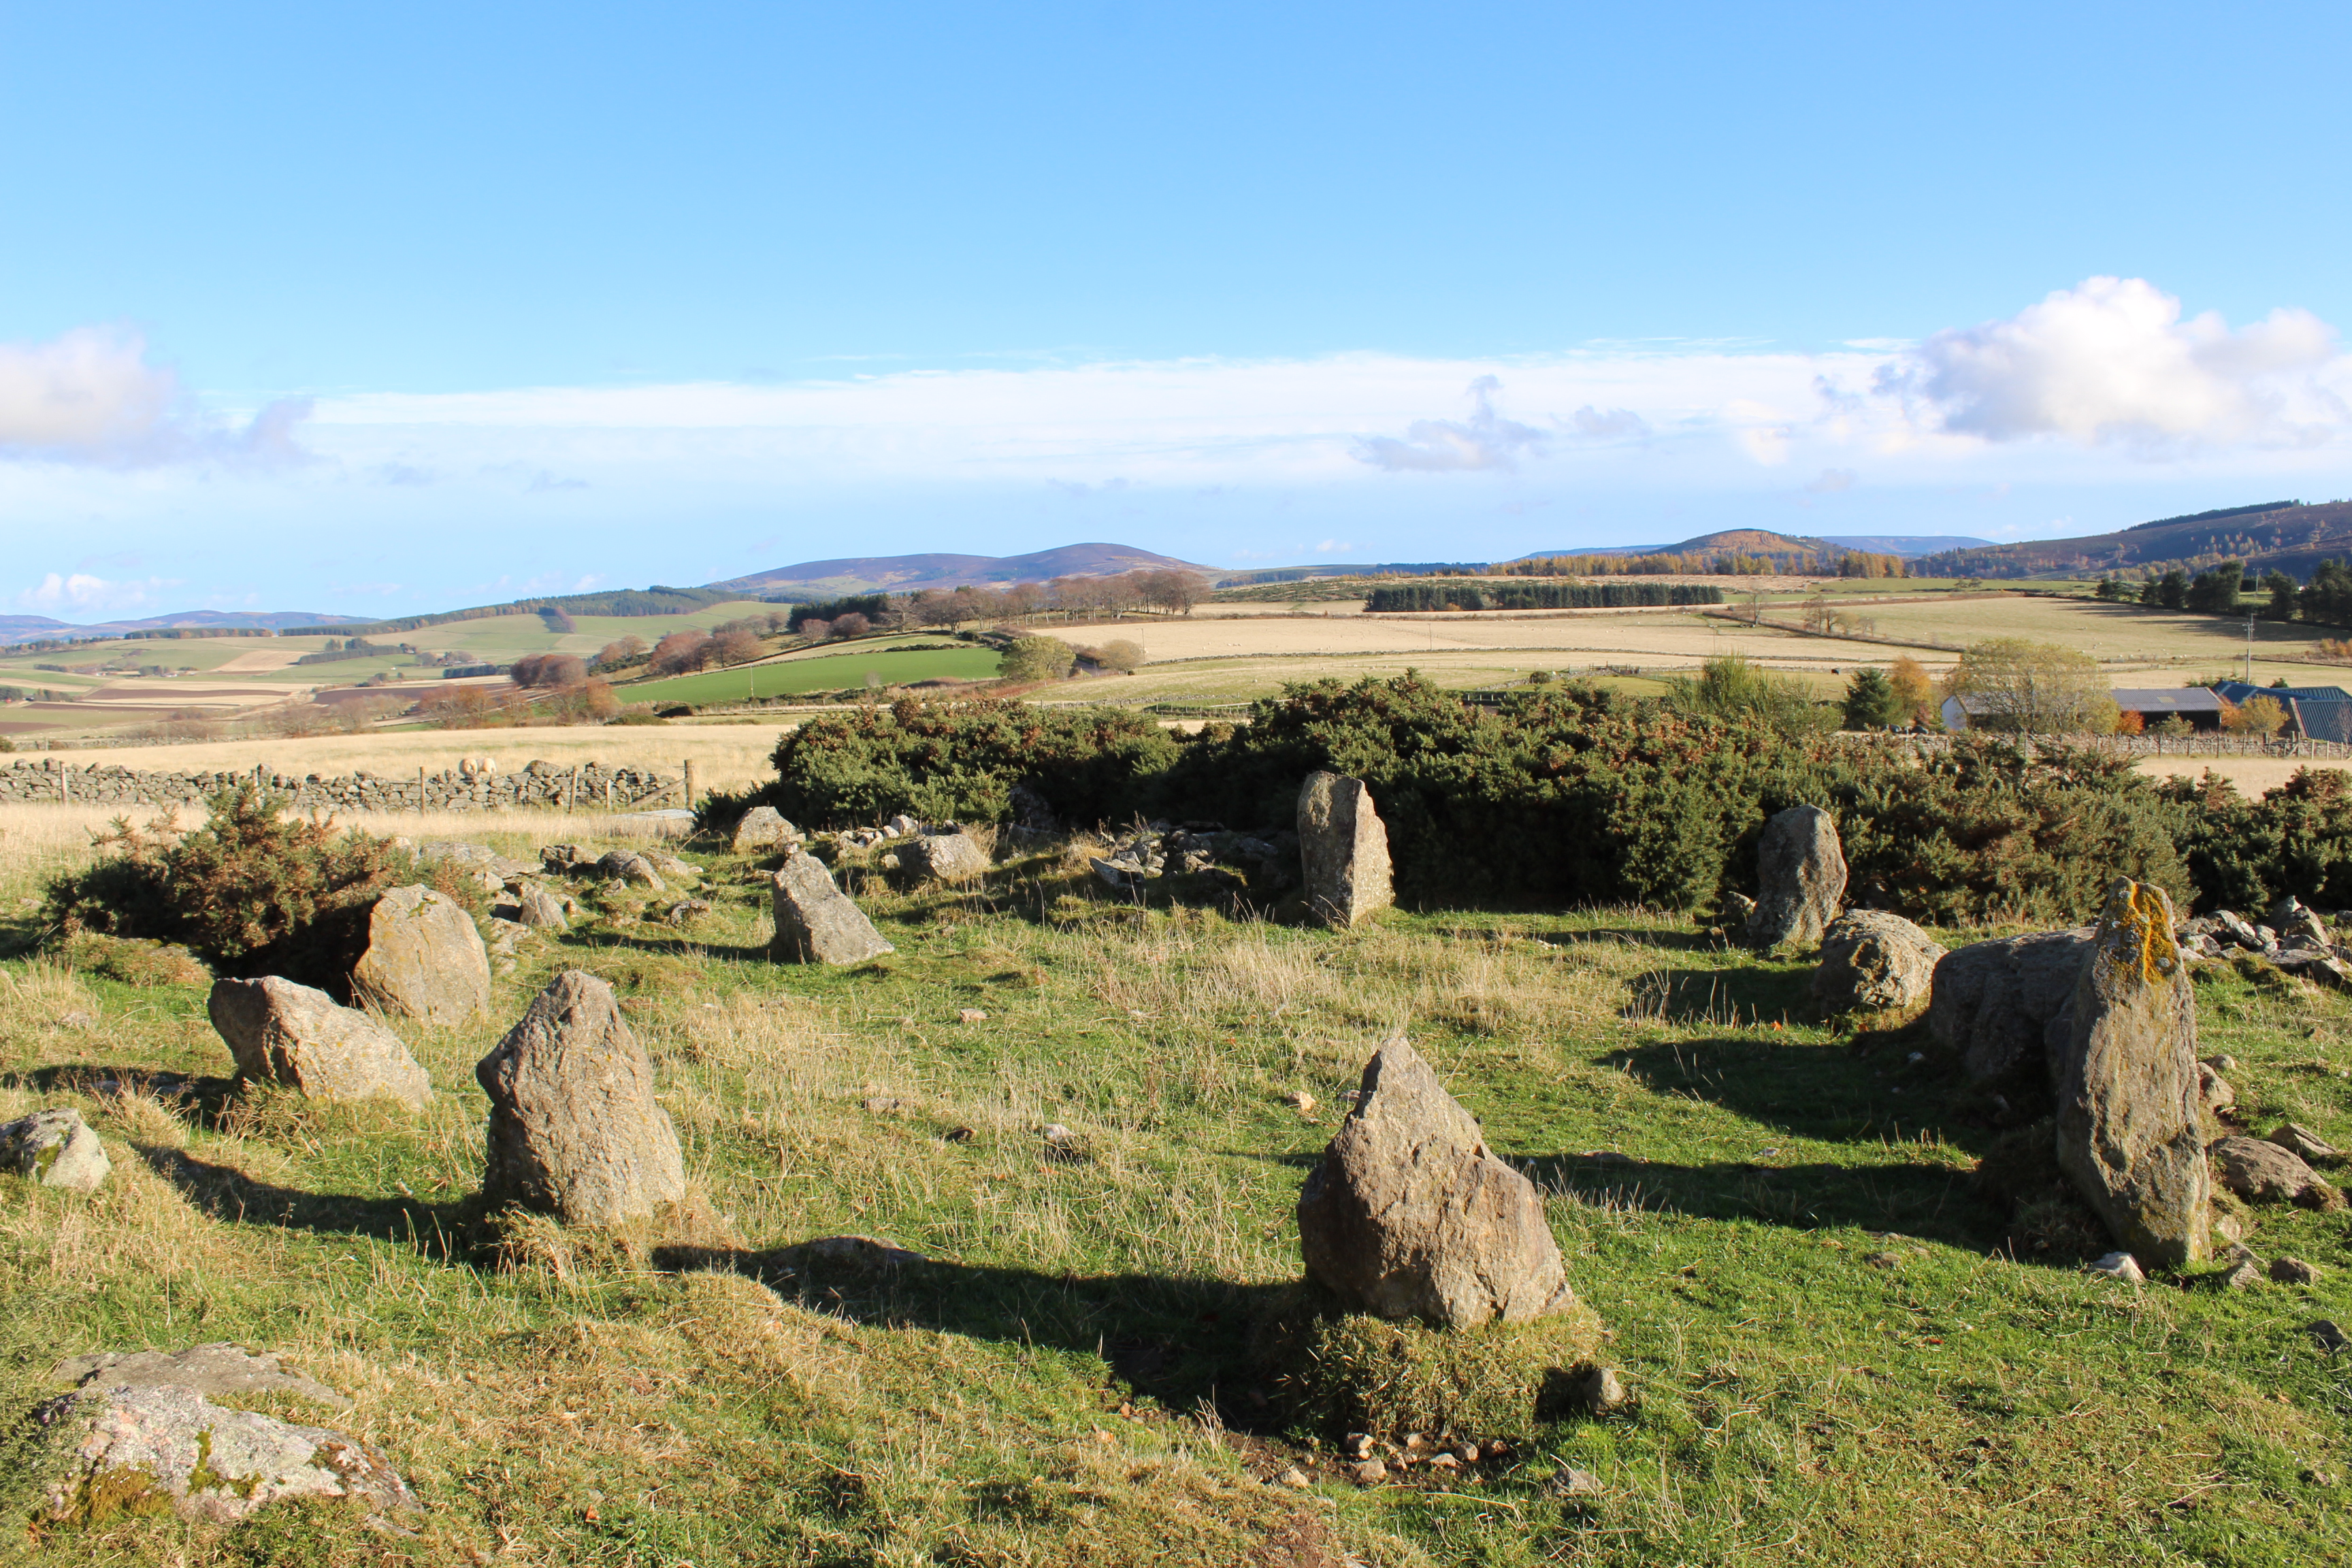 The stone circle was revealed to be a modern replica.